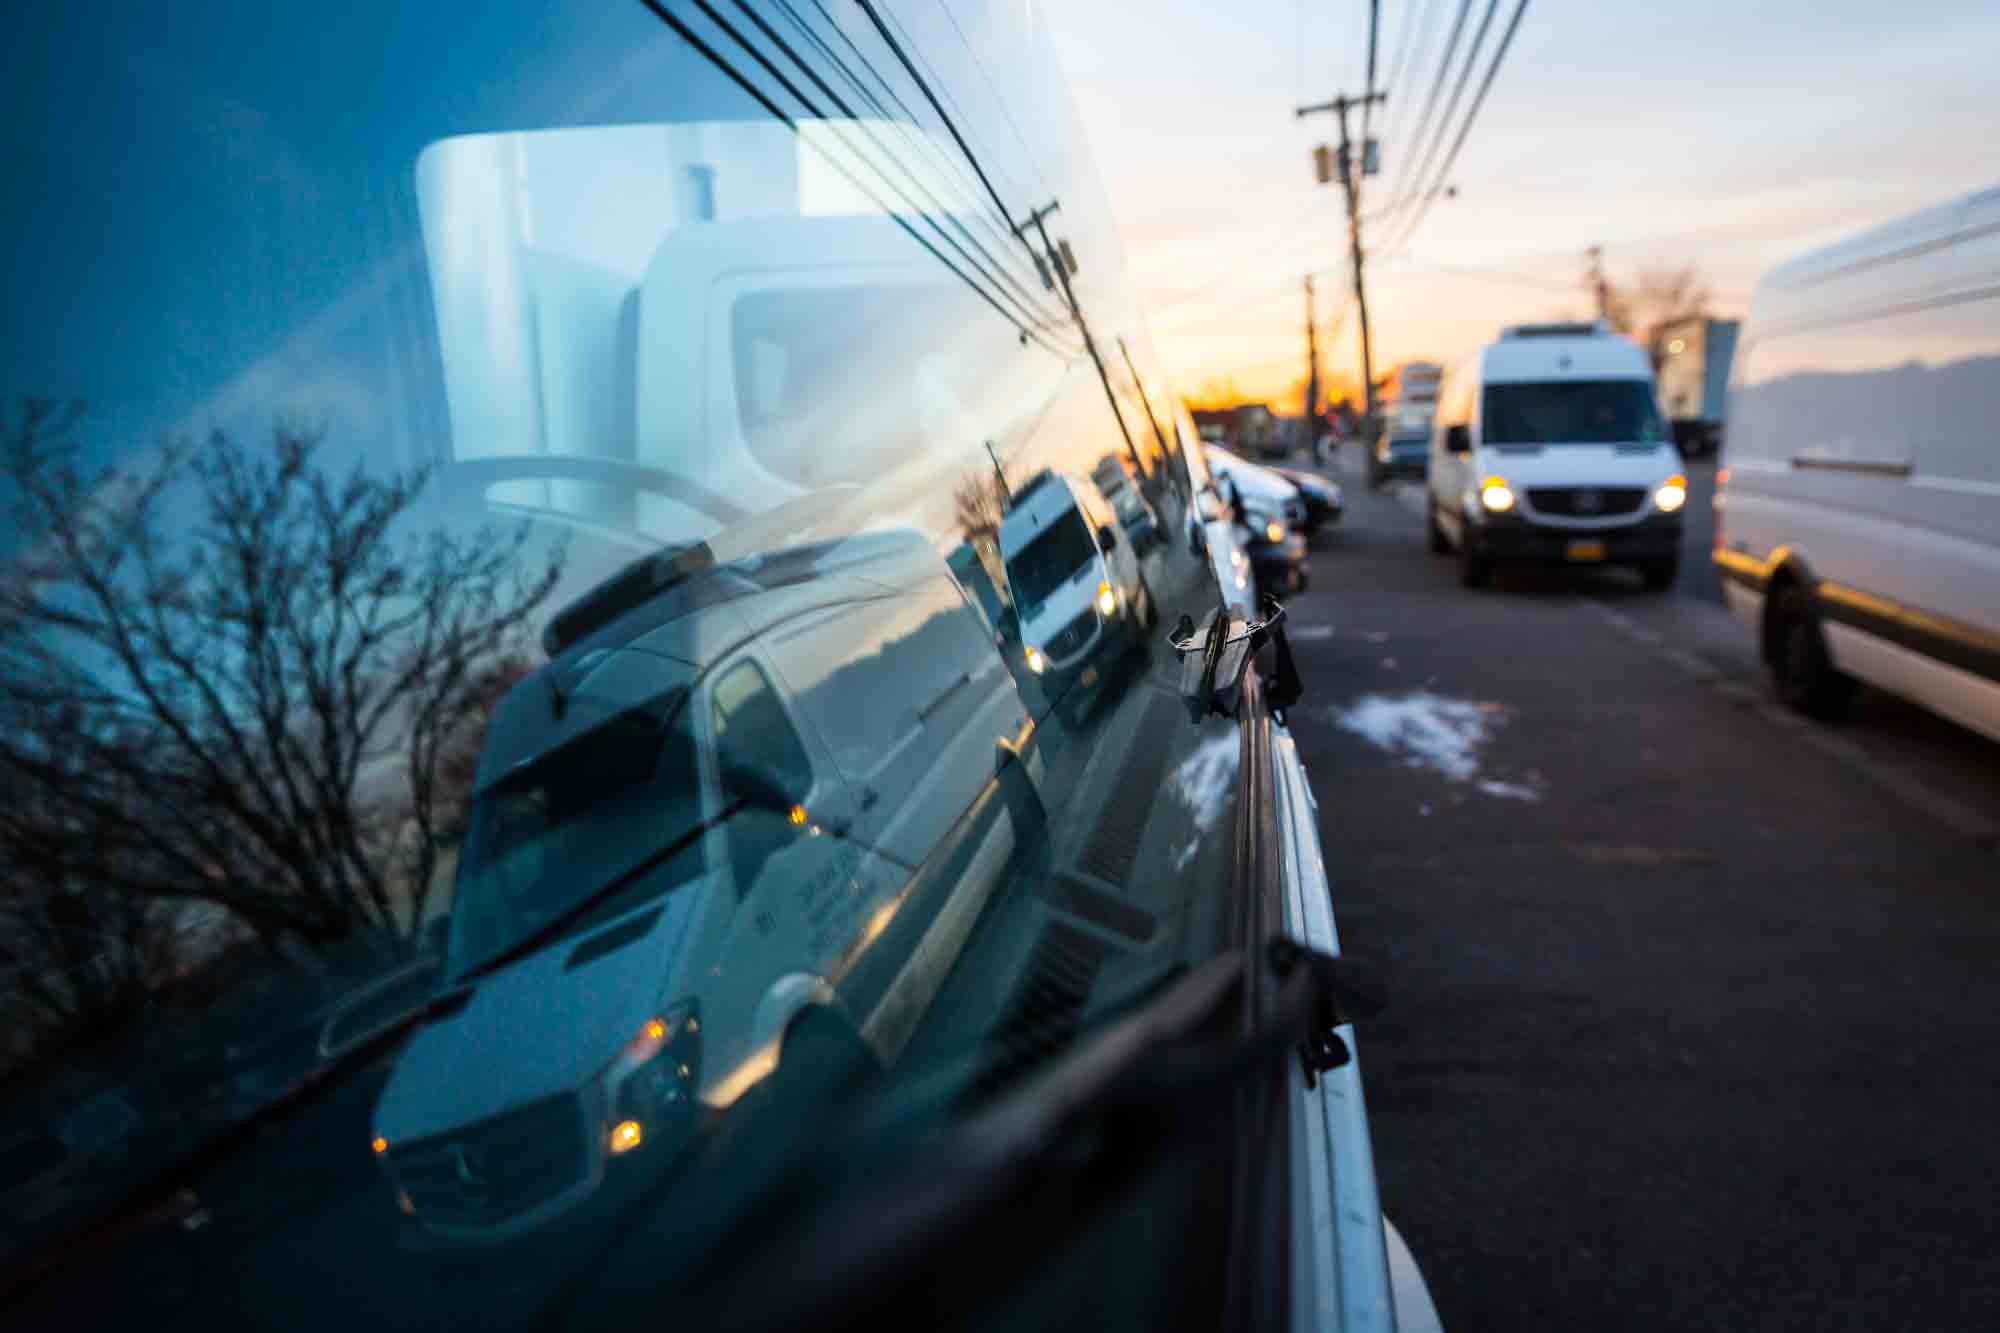 Trucks in a window reflection for an article on website photography tips